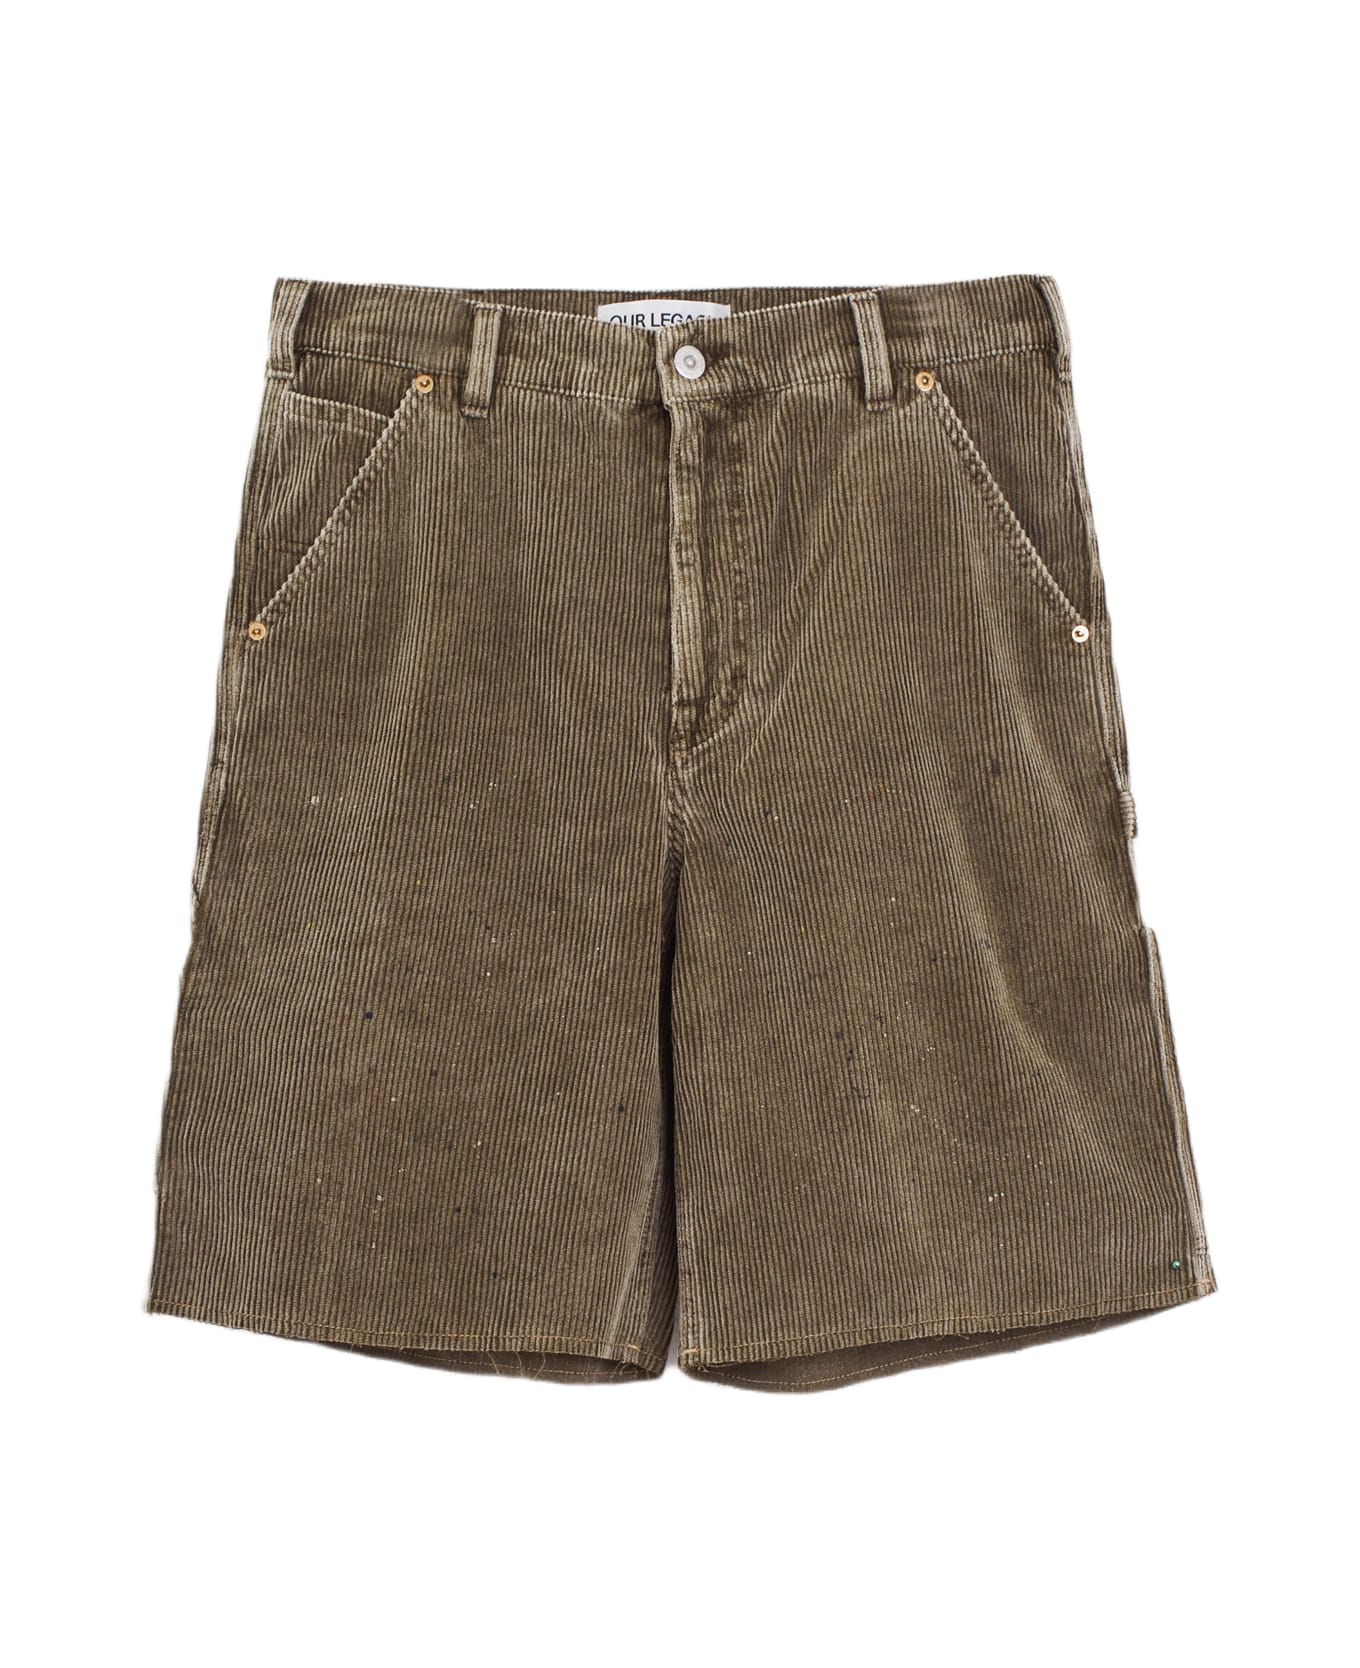 Our Legacy Joiner Shorts - brown ショートパンツ